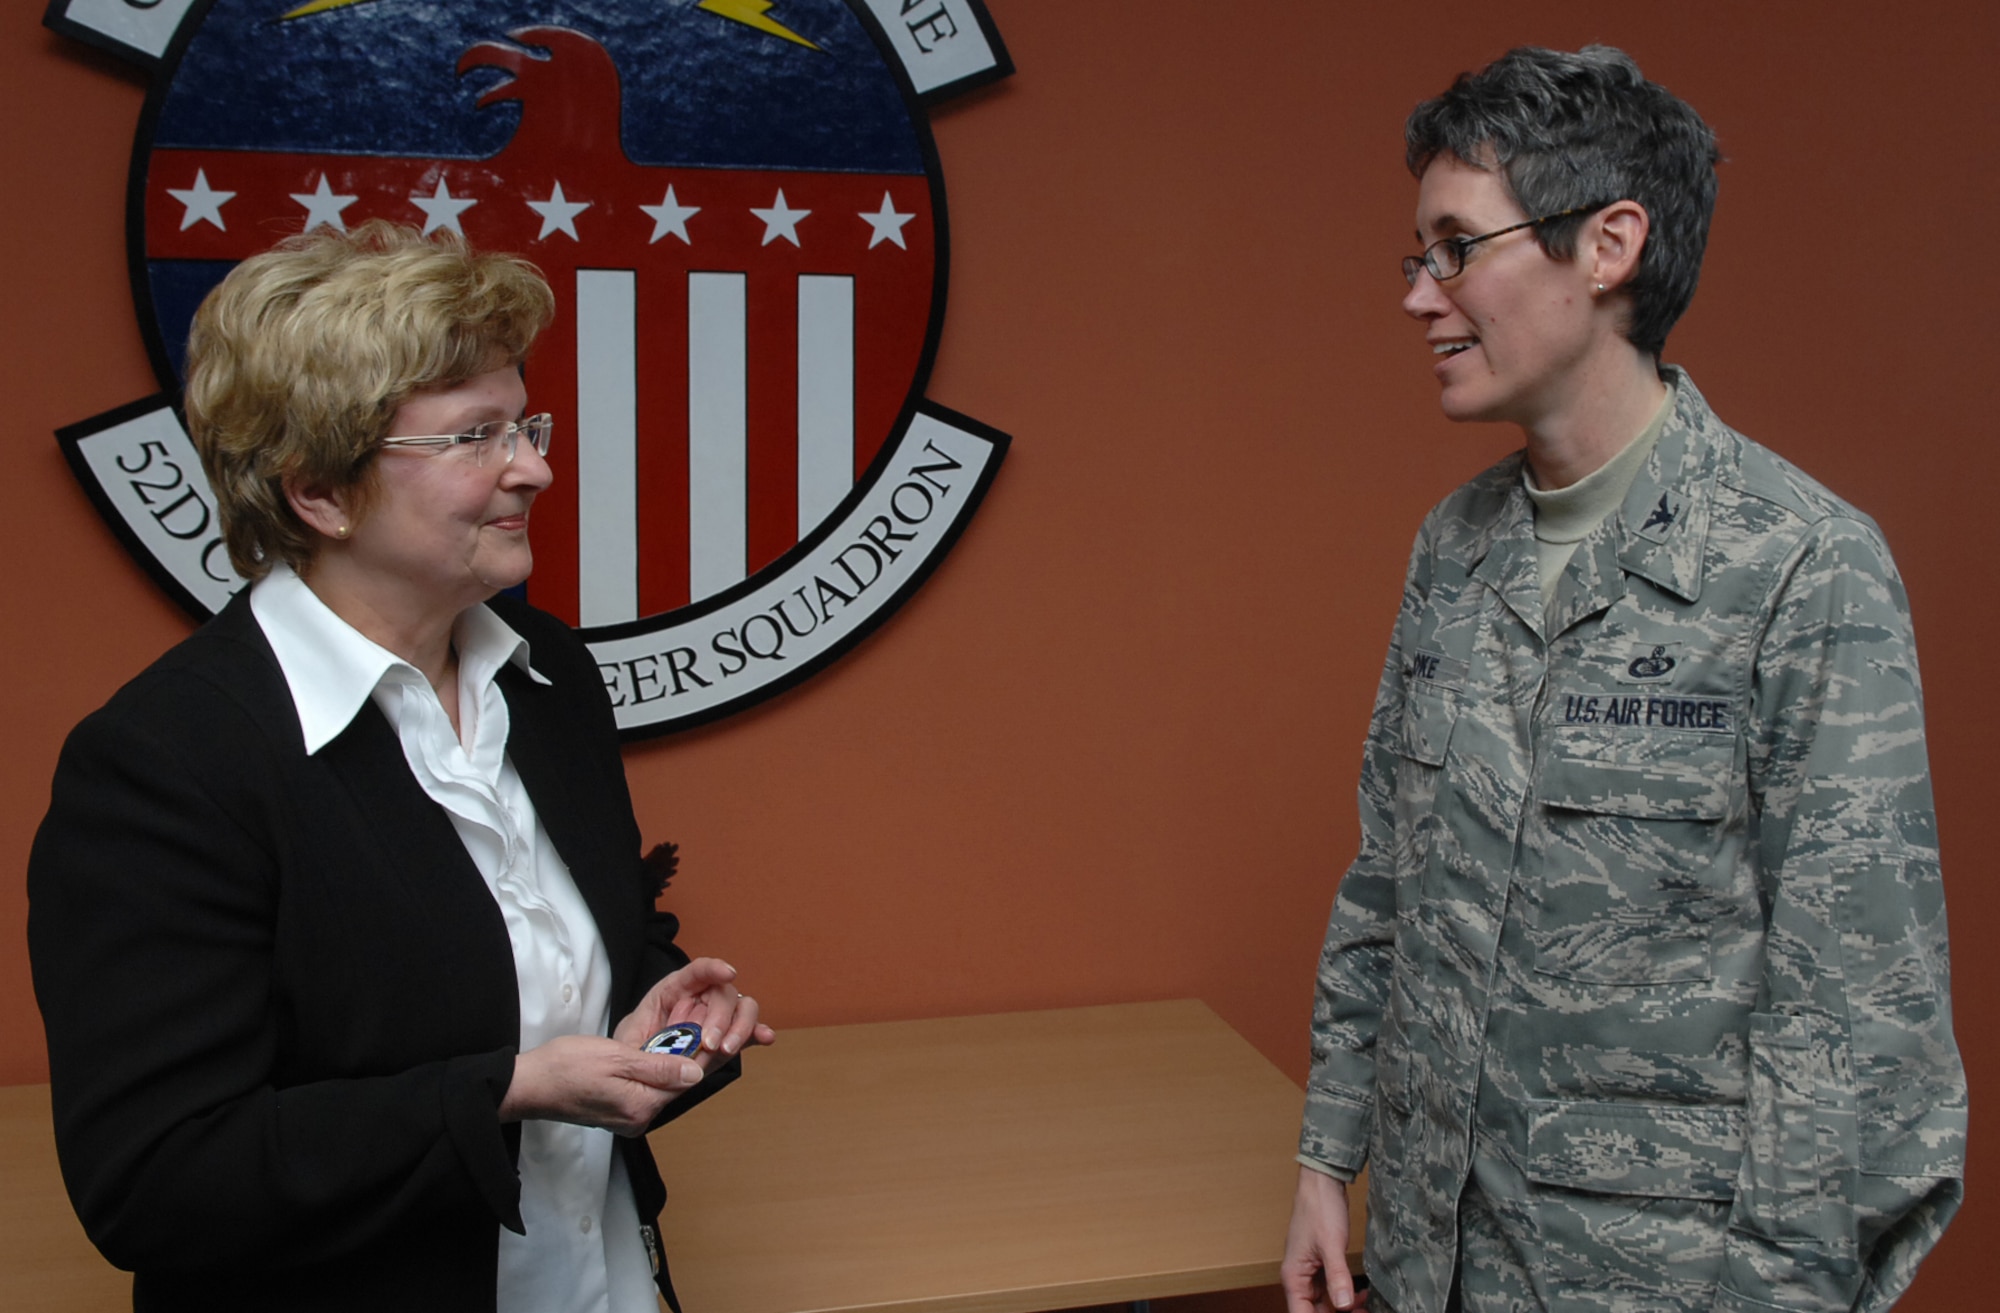 SPANGDAHLEM AIR BASE, Germany -- Col. Jodine Tooke, 52nd Mission Support Group commander, gives a coin to Helga E. Bialluch, retired 52nd Civil Engineer Squadron manpower technician, for her 43 years of dedication and service to Spangdahlem Air Base during her retirement ceremony Jan. 29 in the 52nd CES conference room. Mrs. Bialluch's job was significant to the Air Force and 52nd Fighter Wing because in her position she was responsible for all 52nd CES manpower resources. (U.S. Air Force photo/Airman 1st Class Nick Wilson)